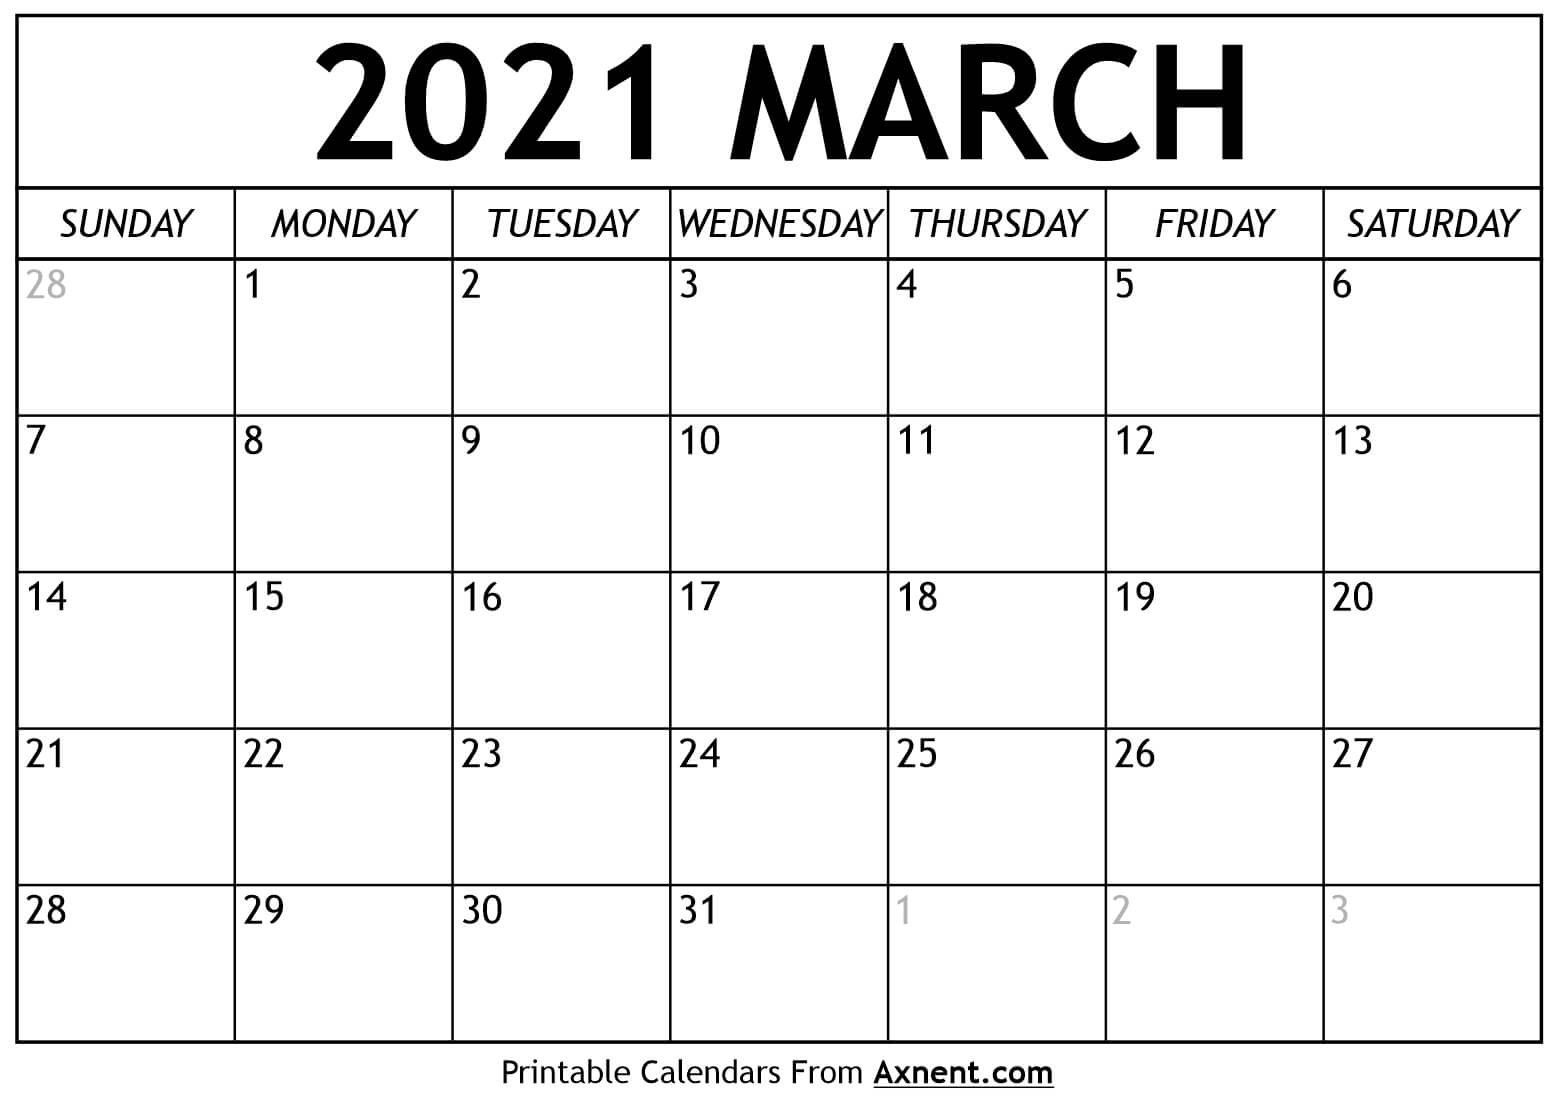 Printable March 2021 Calendar Template - Time Management-Blank Calendar Pages March 2021